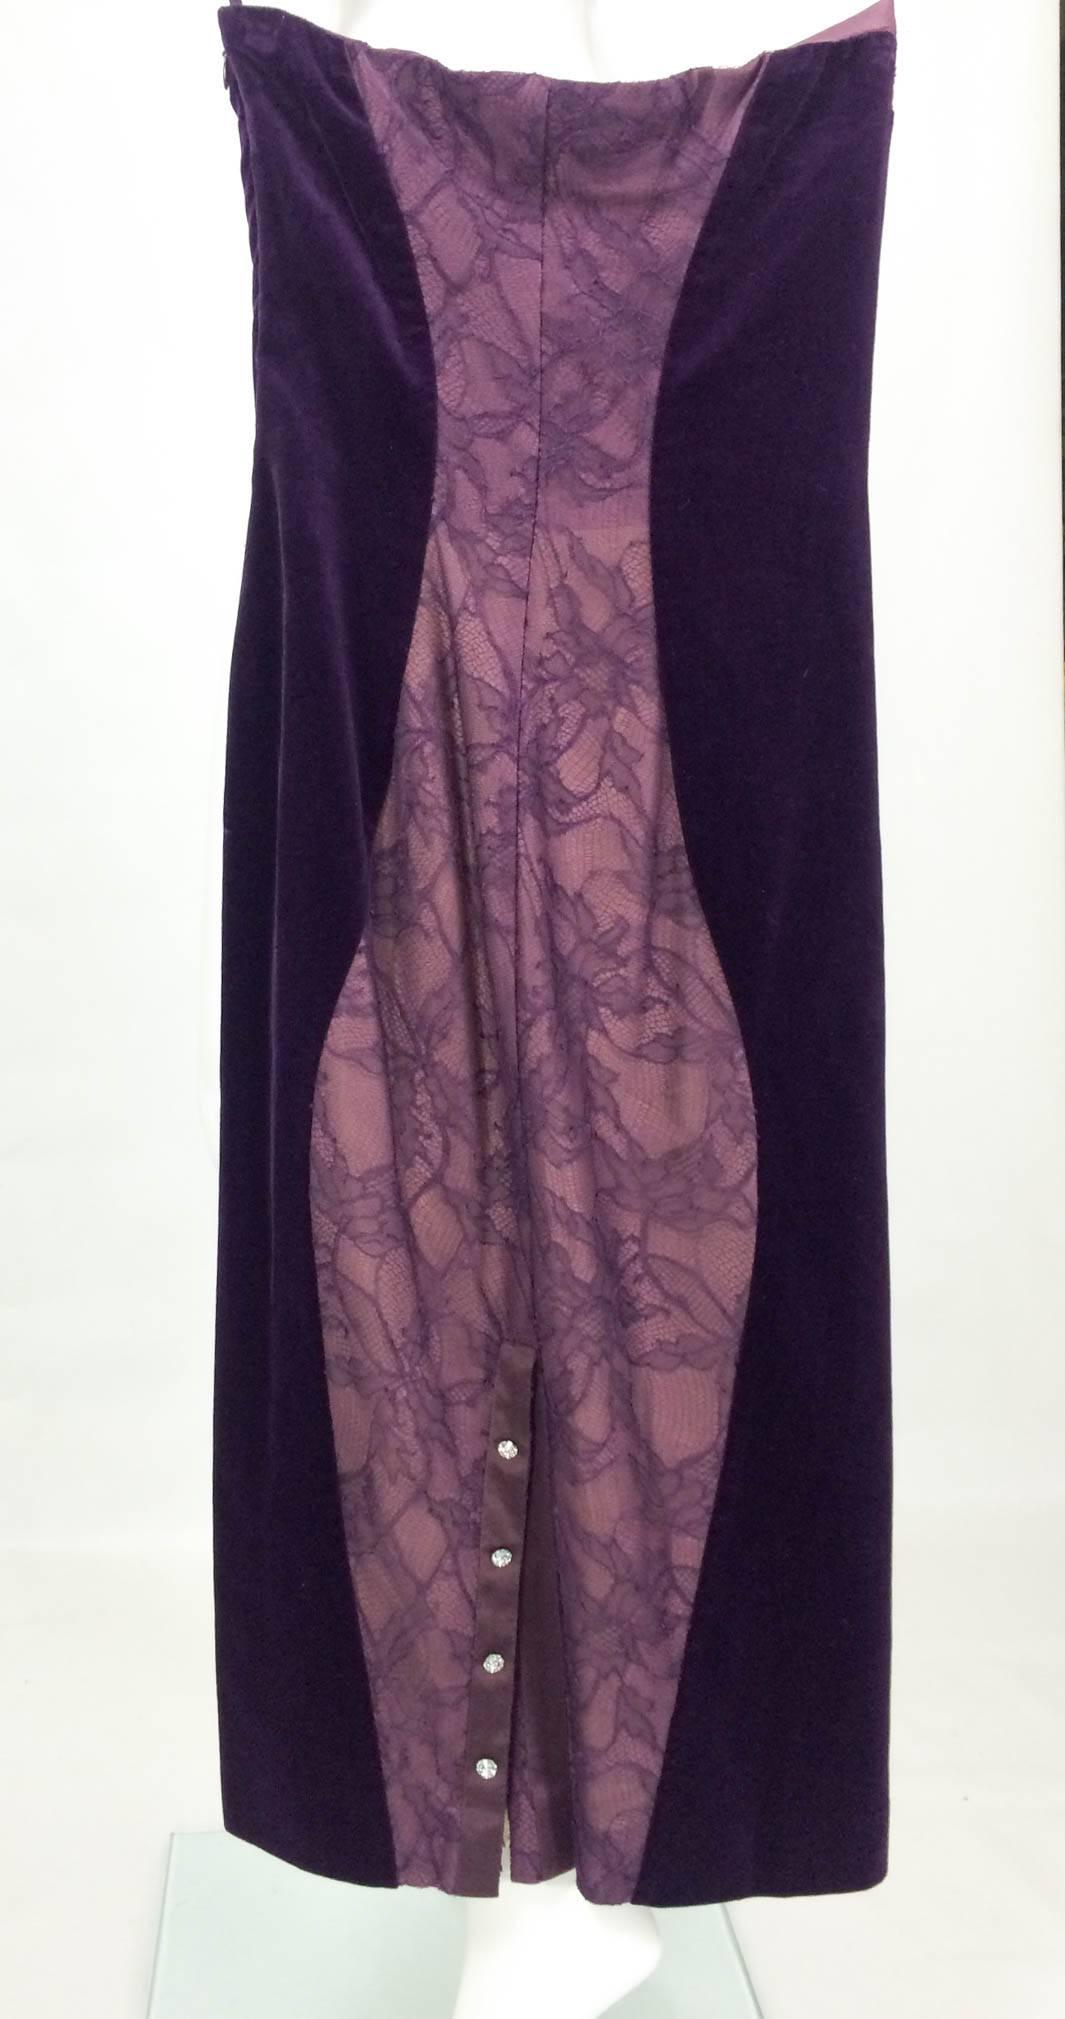 Paco Rabanne Velvet and Lace Dress - 1970s For Sale 2